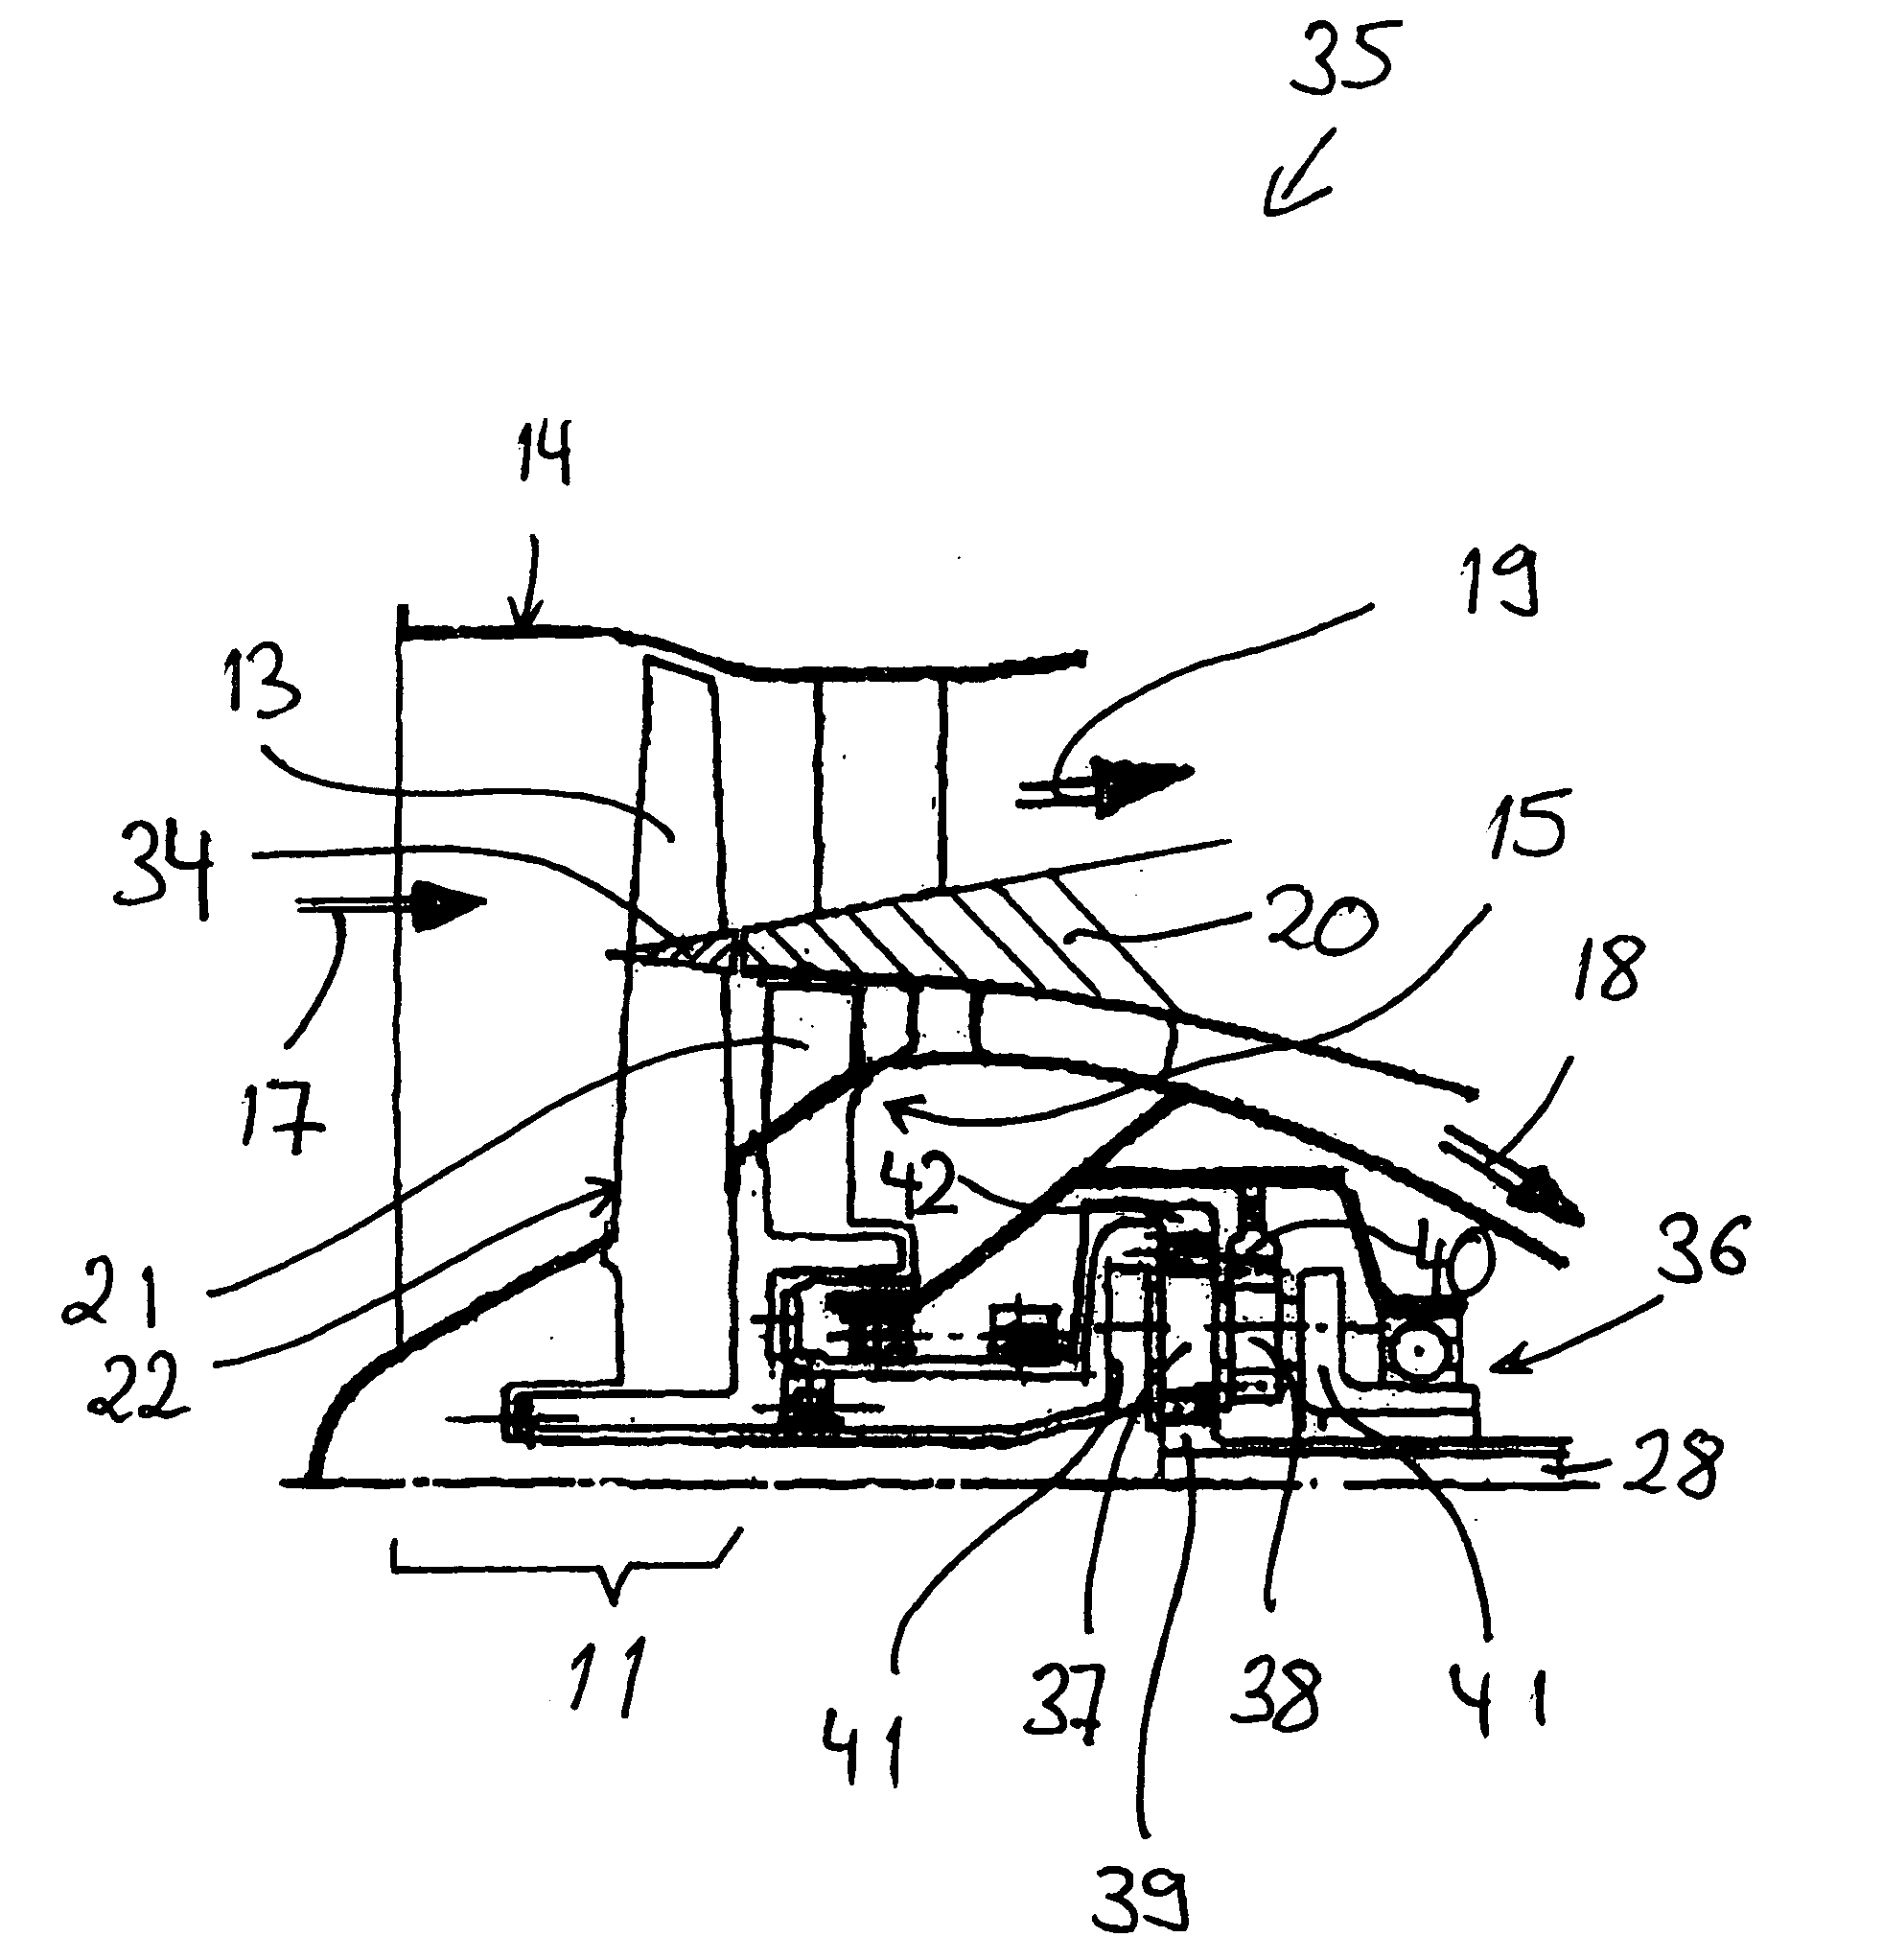 Jet engine with compact arrangement of fan